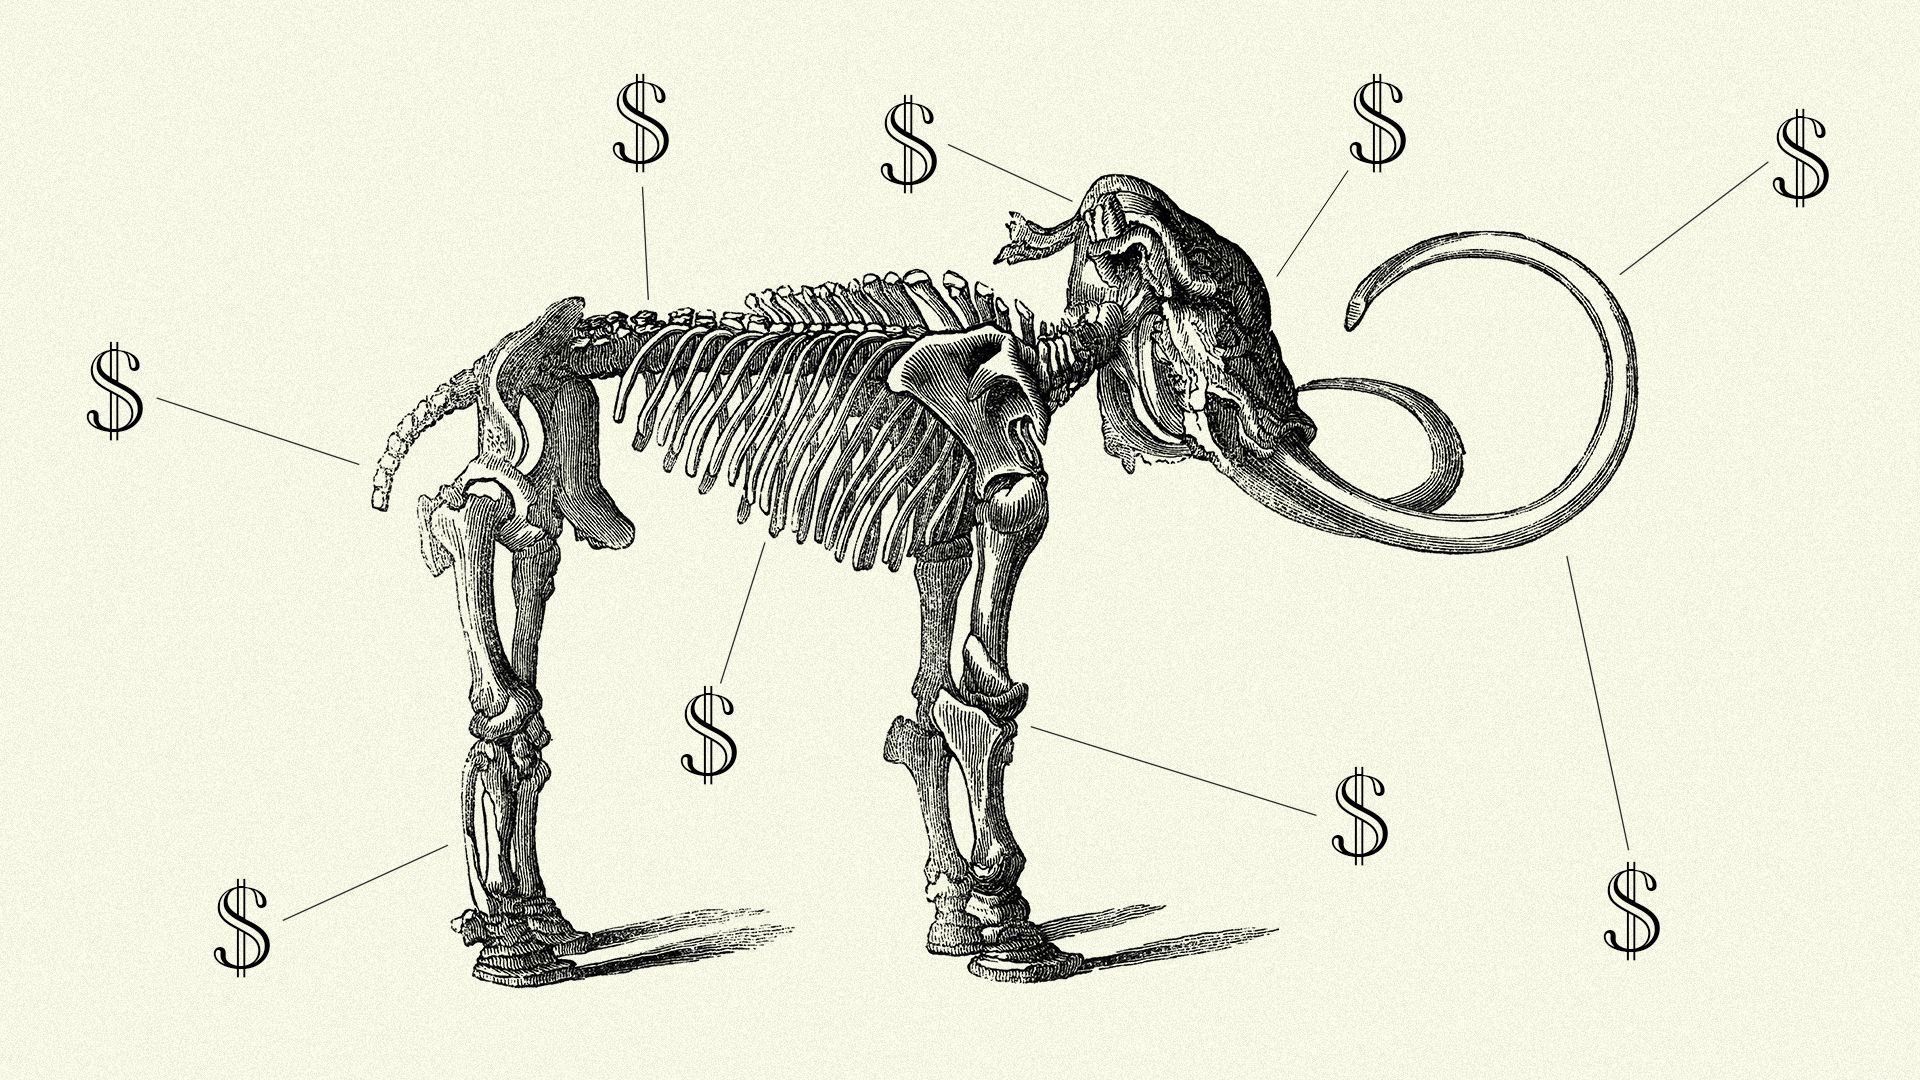 Illustration of scientific drawing of a wooly mammoth with dollar signs.